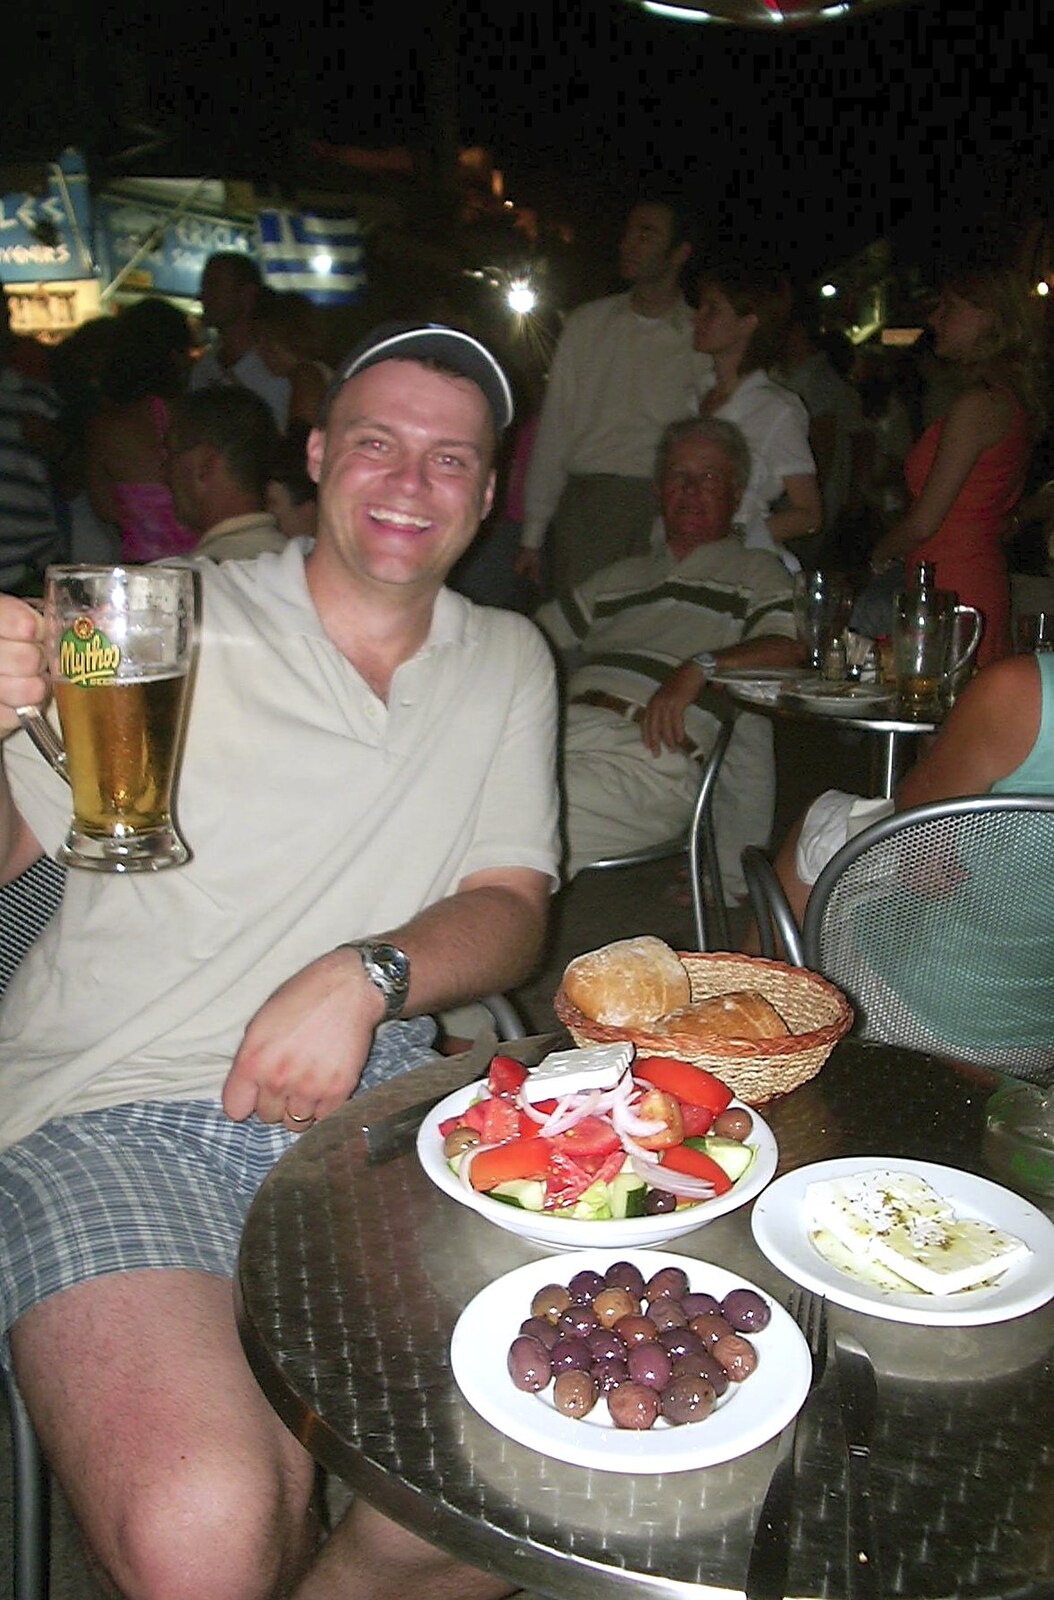 A Postcard From Athens: A Day Trip to the Olympics, Greece - 19th August 2004: Nick holds up a beer as we eat olives and feta